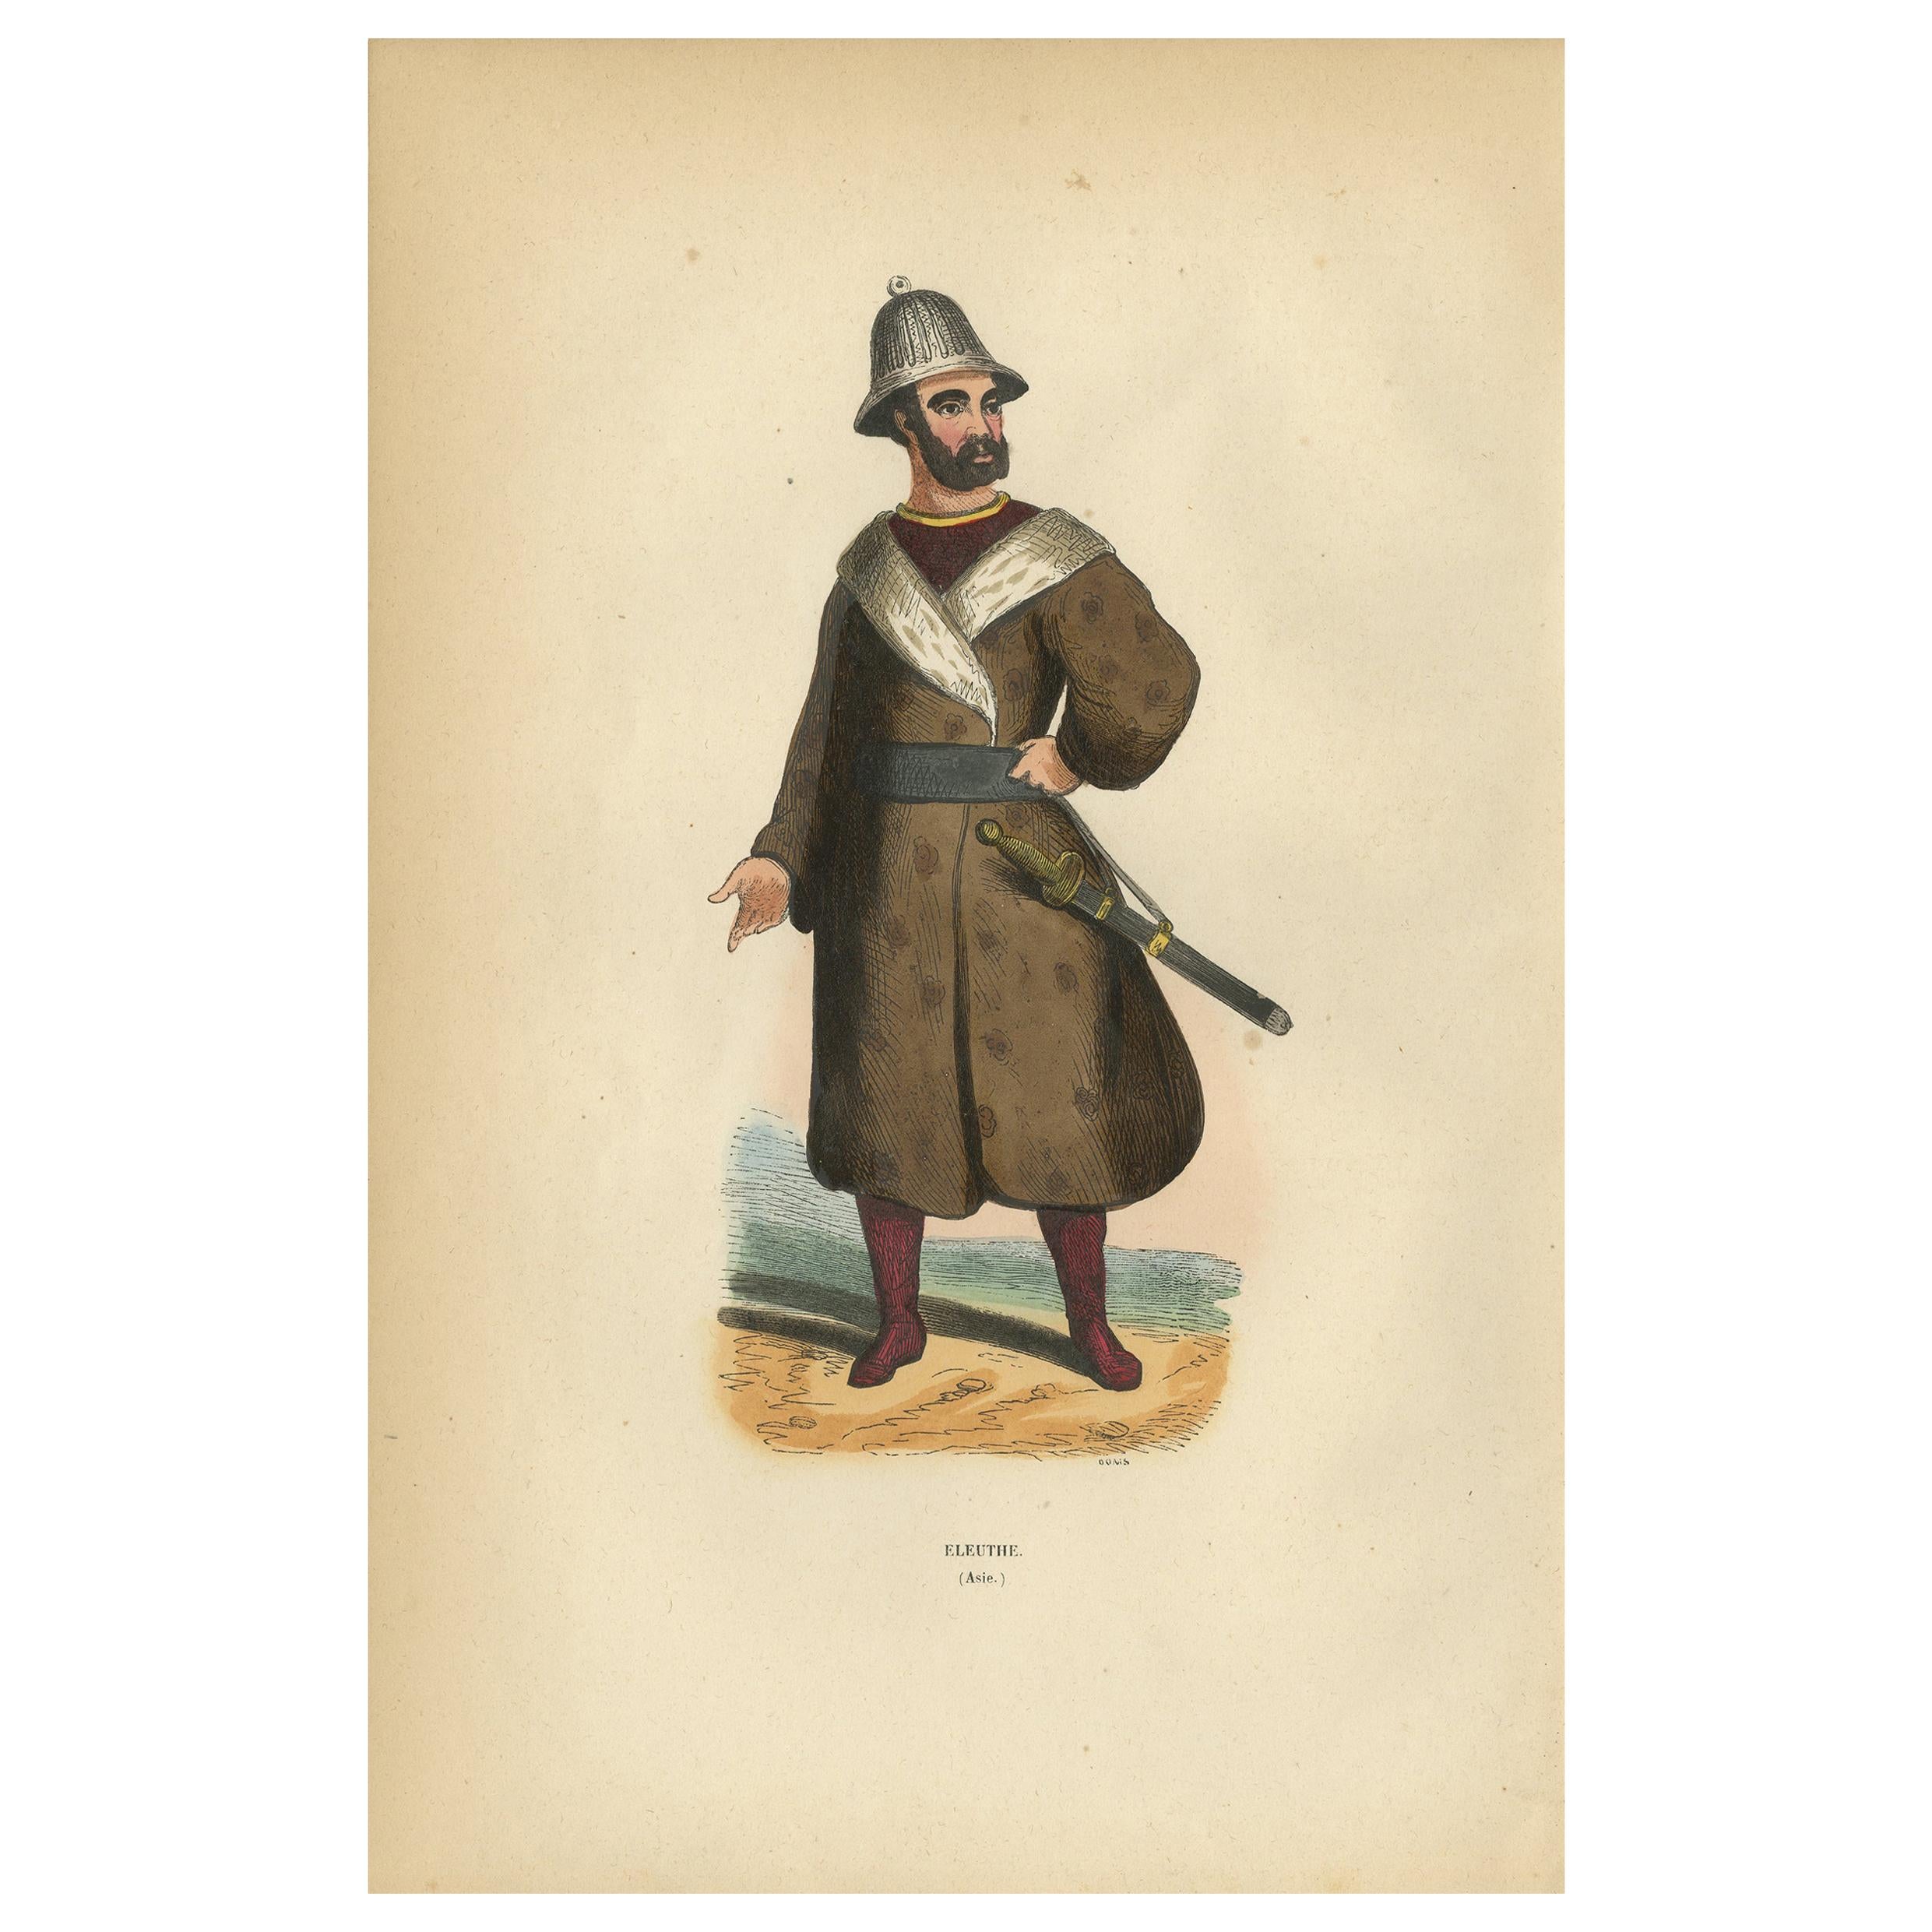 Antique Print of an Eleuth or Oirat man, the westernmost group of the Mongols For Sale